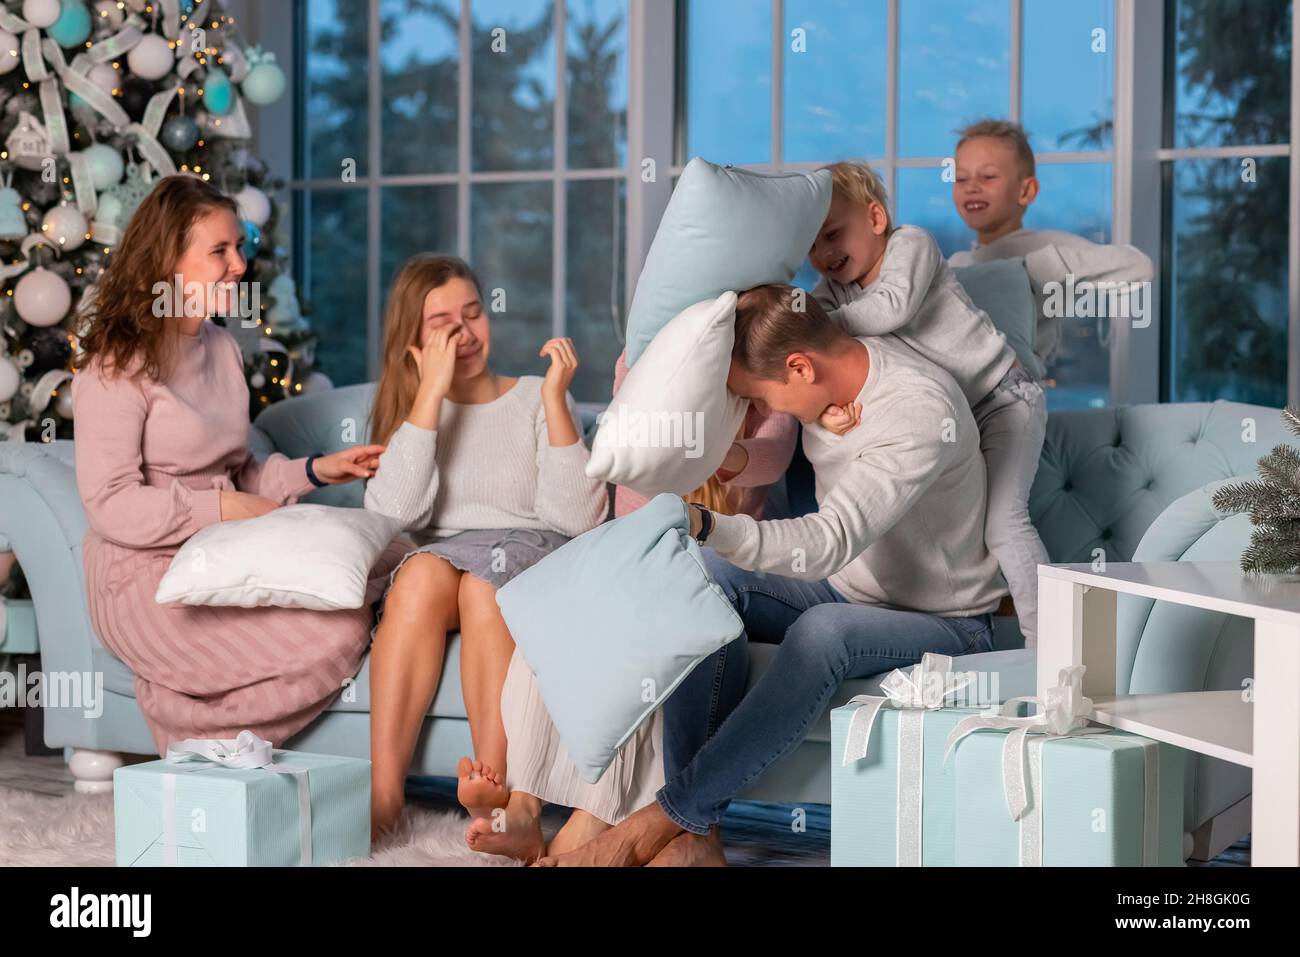 Big Happy family with many kids having fun and pillow fight under the Christmas tree. Christmas family eve, christmas mood concept Stock Photo